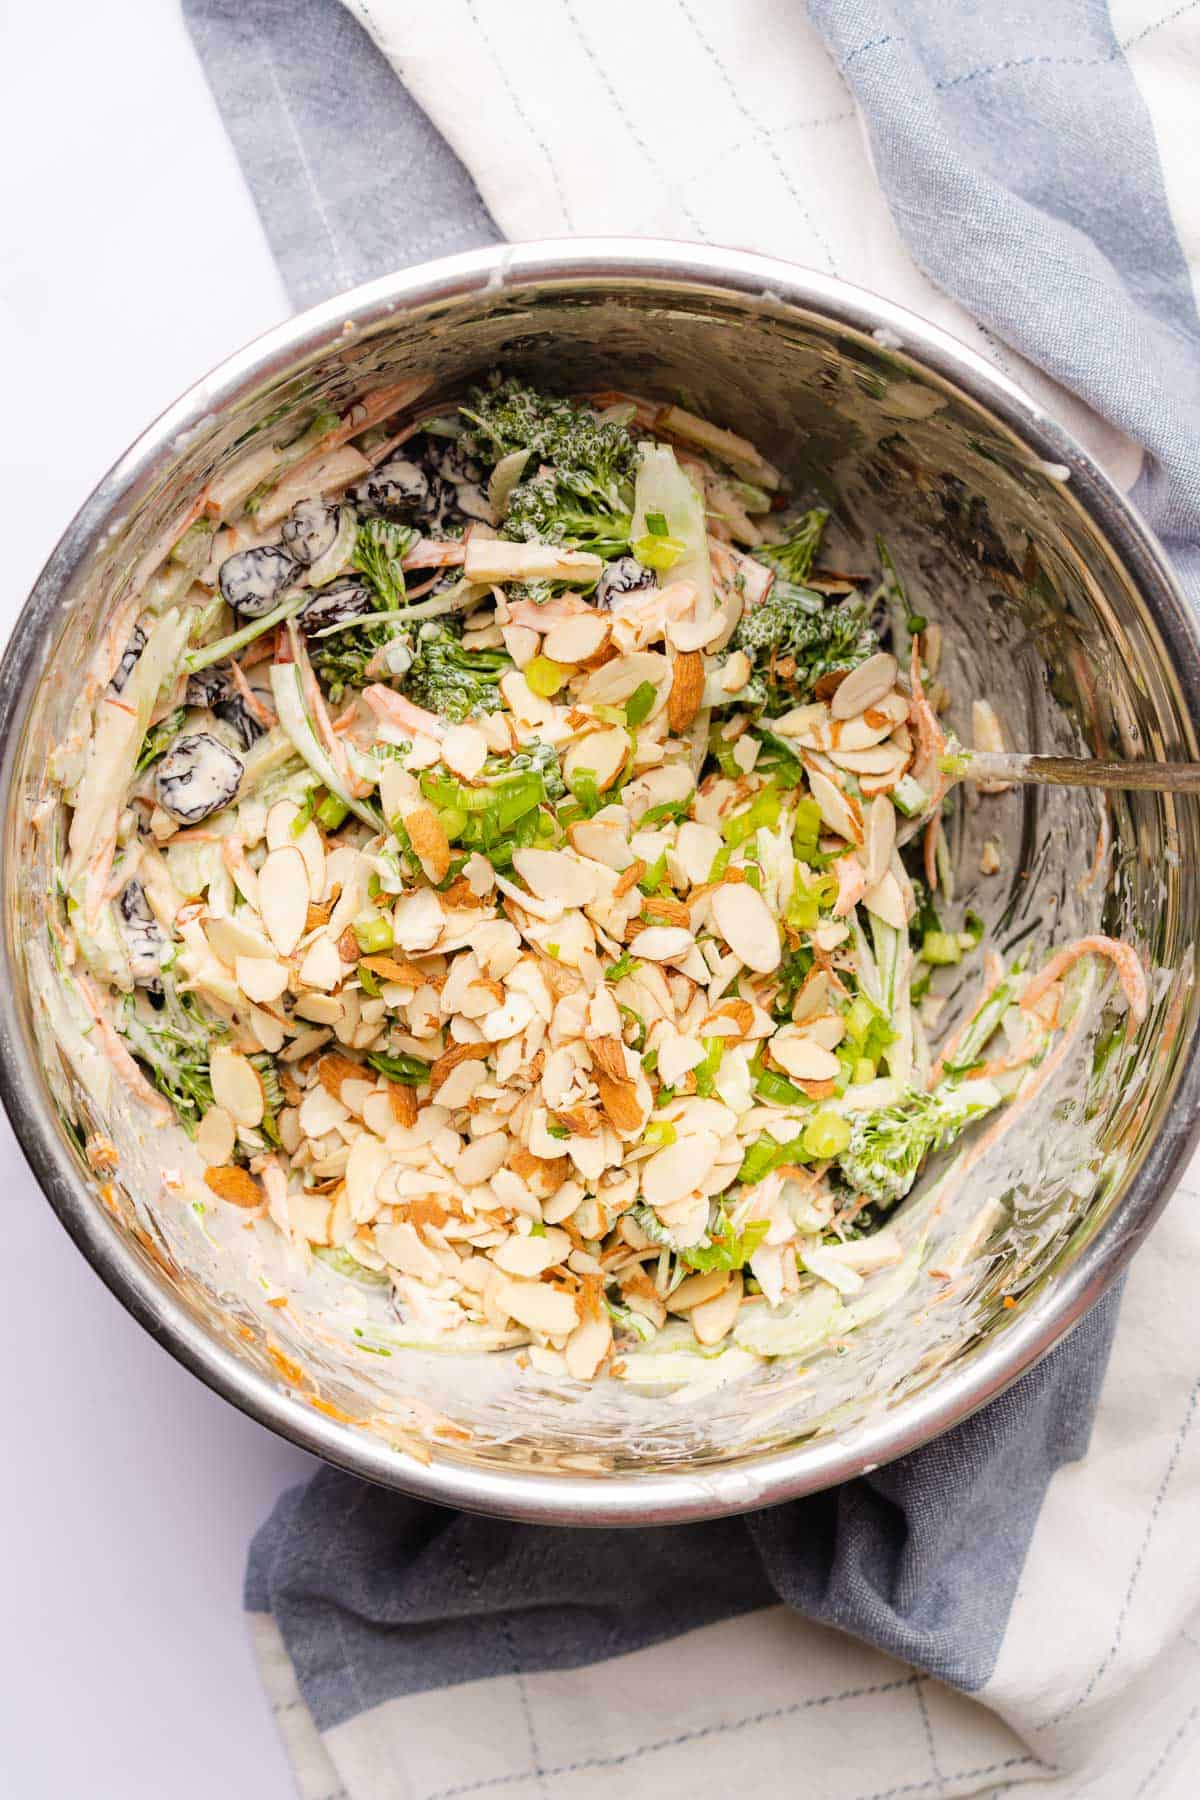 green onions and almonds to broccolini slaw in a bowl